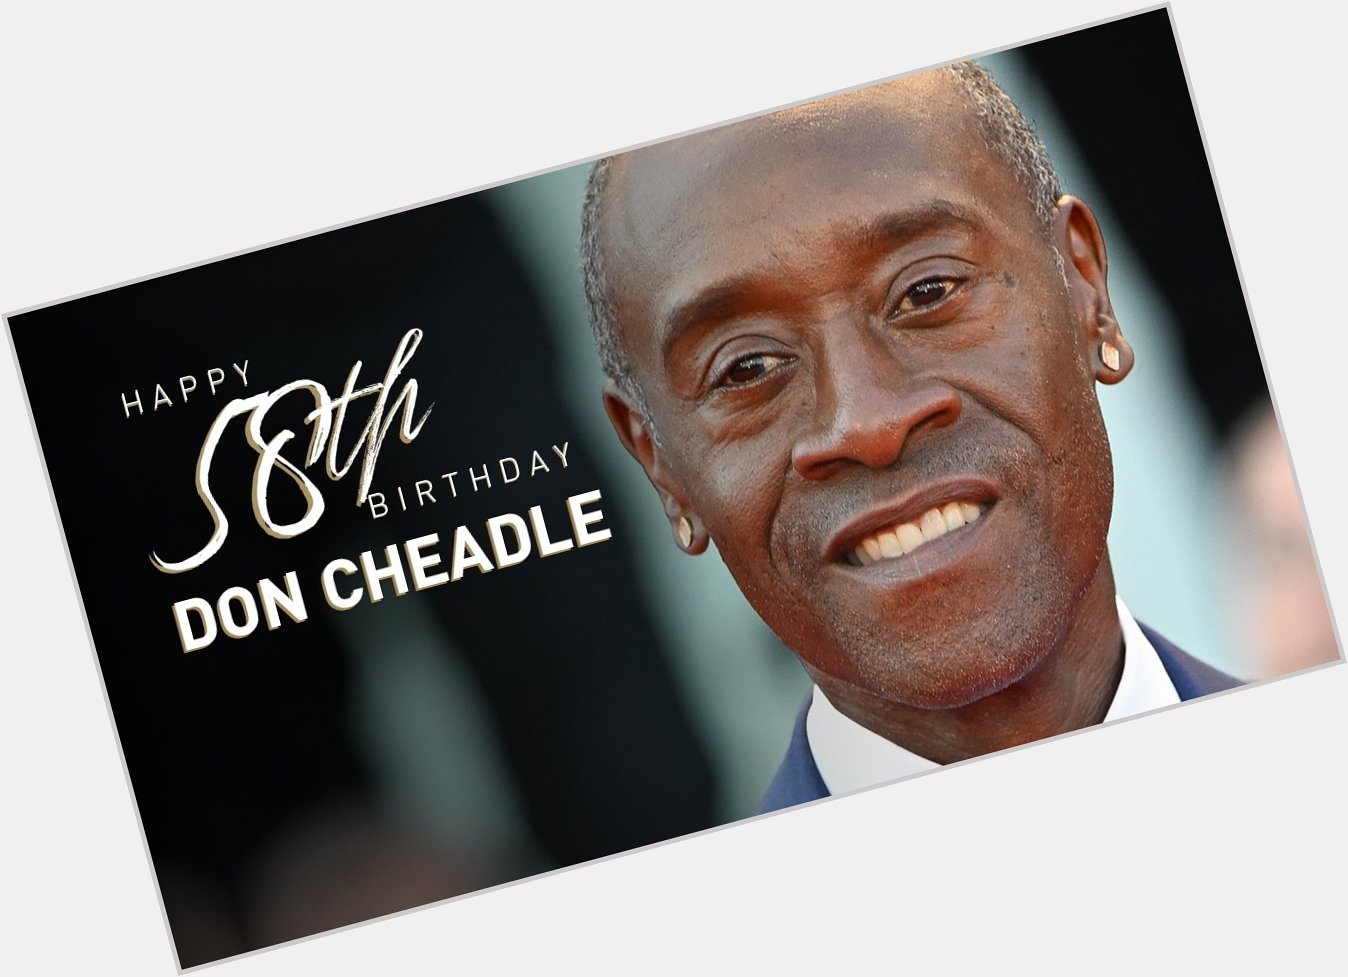 Happy 58th birthday to the fantastic Actor Don Cheadle!

Read his bio here:  